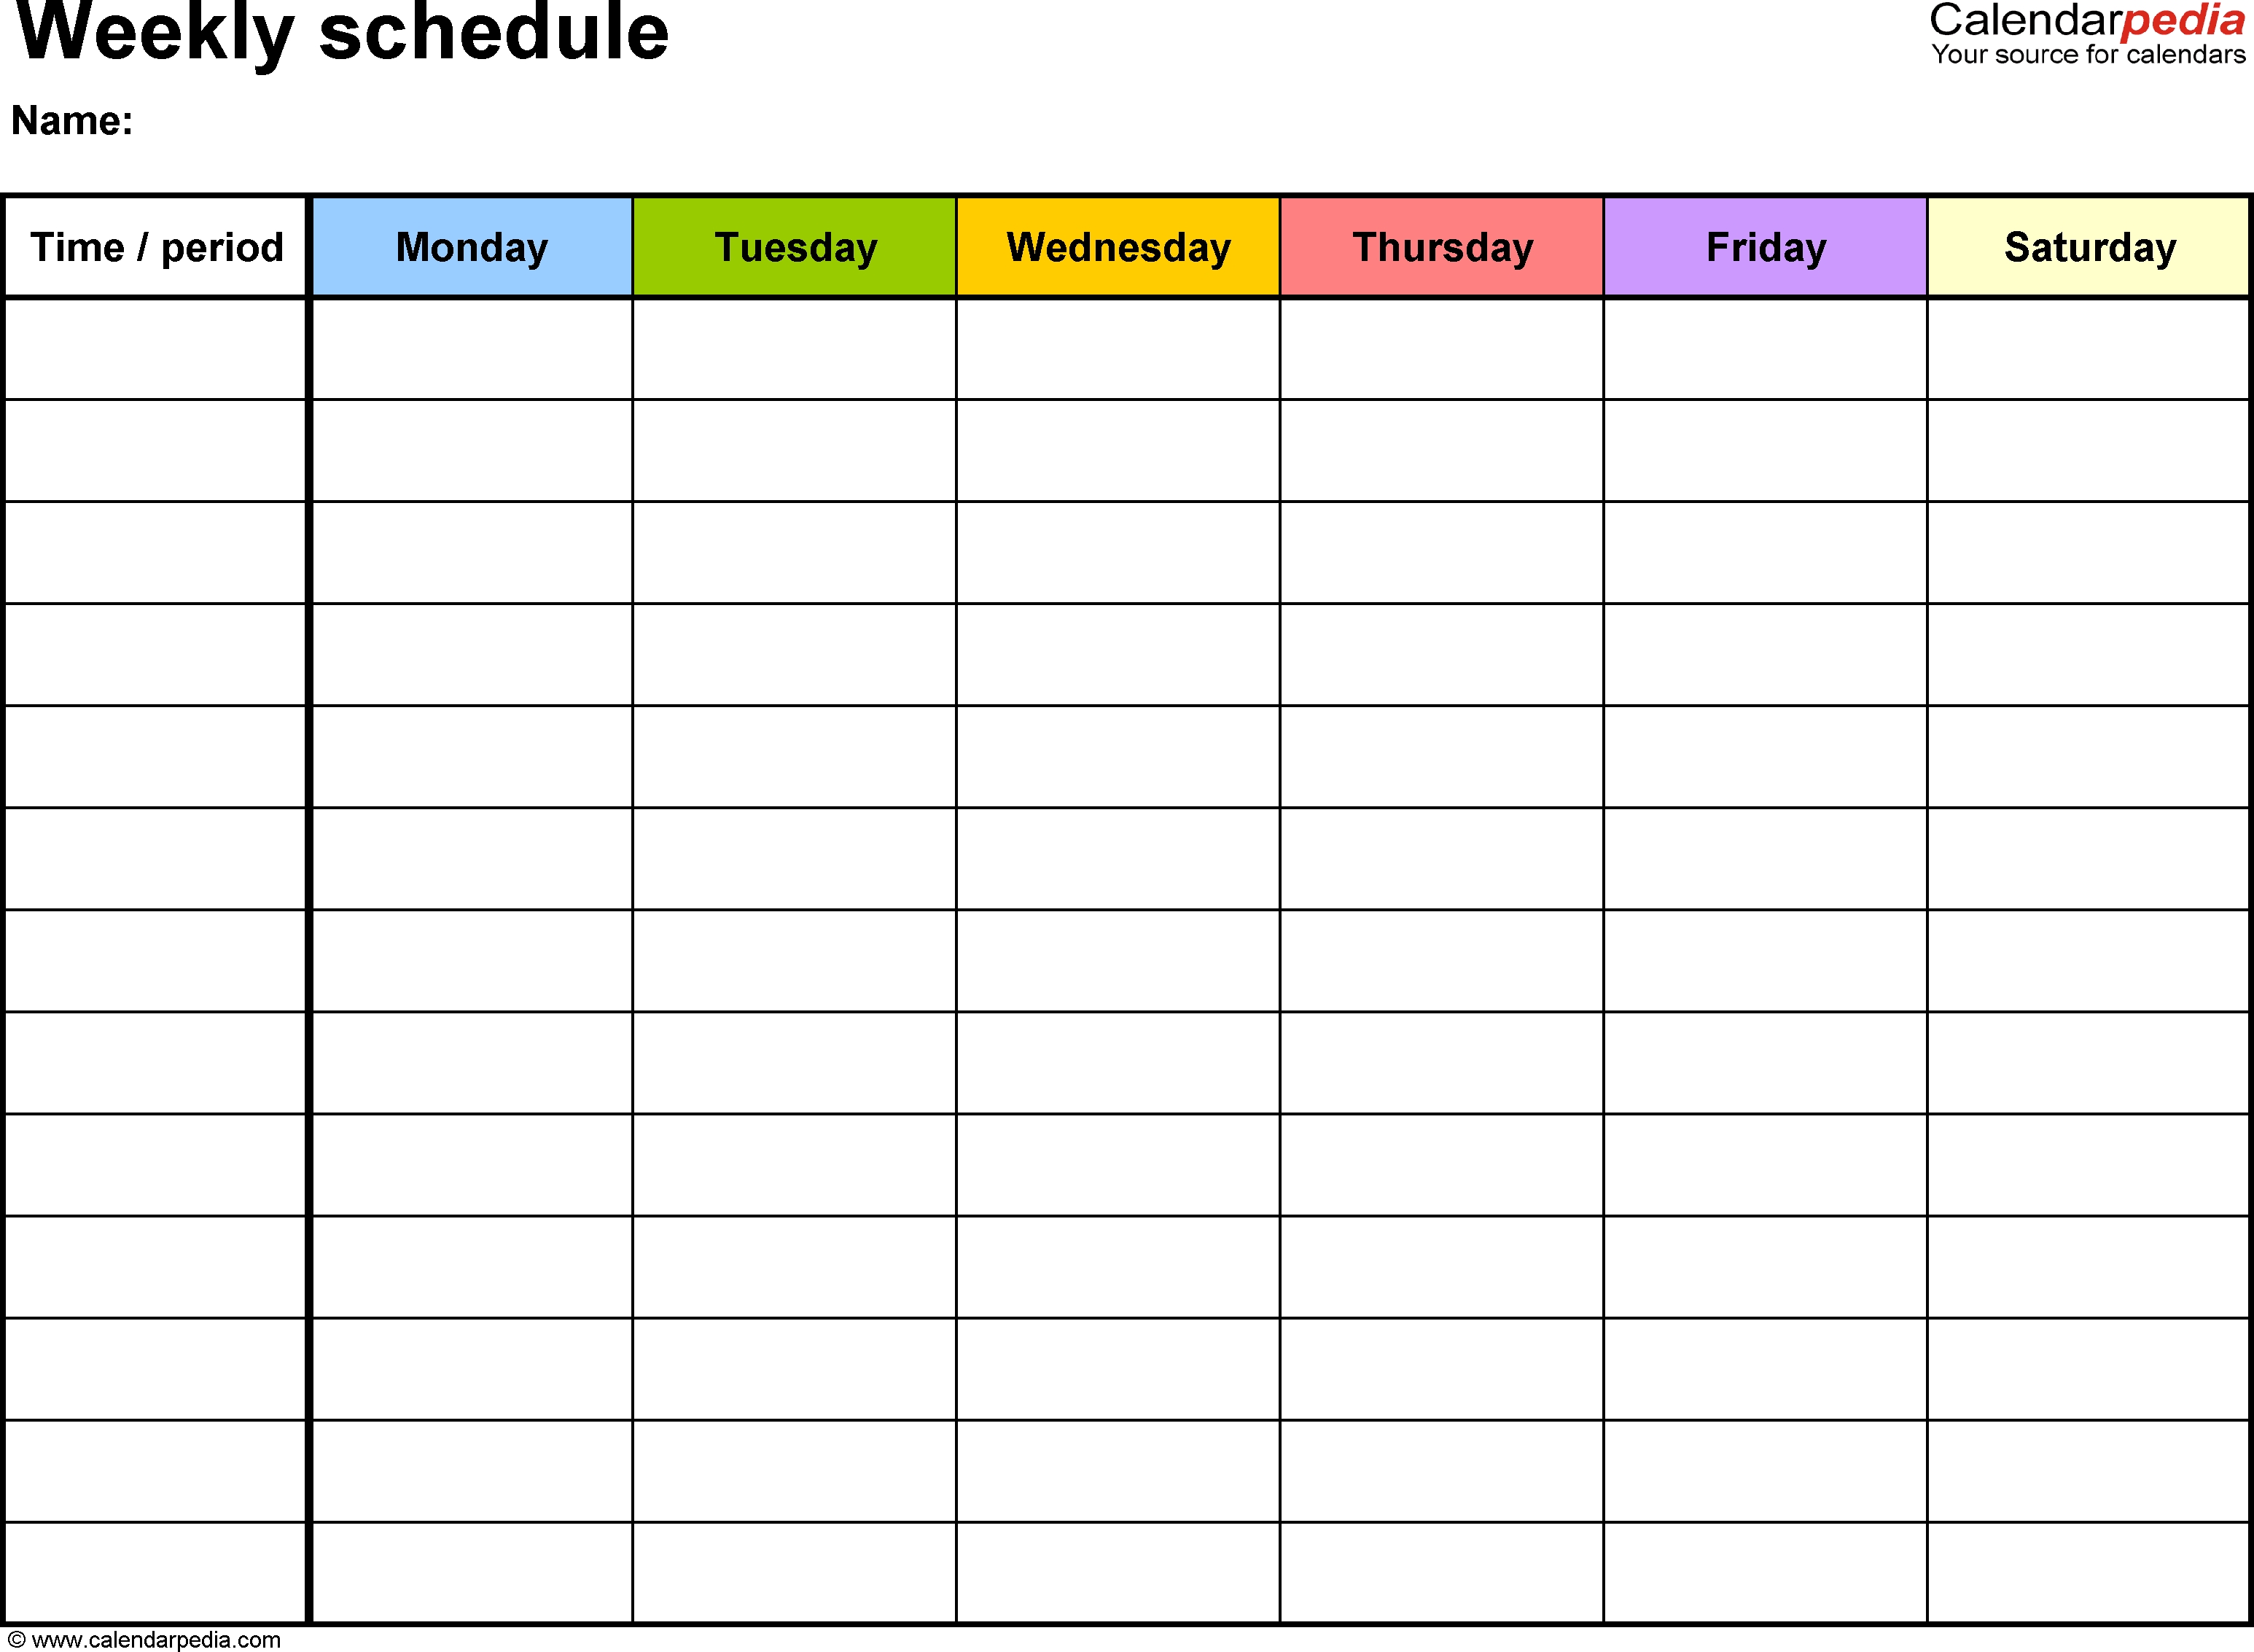 Free Weekly Schedule Templates For Word - 18 Templates for 6 Week Blank Calendar Printable